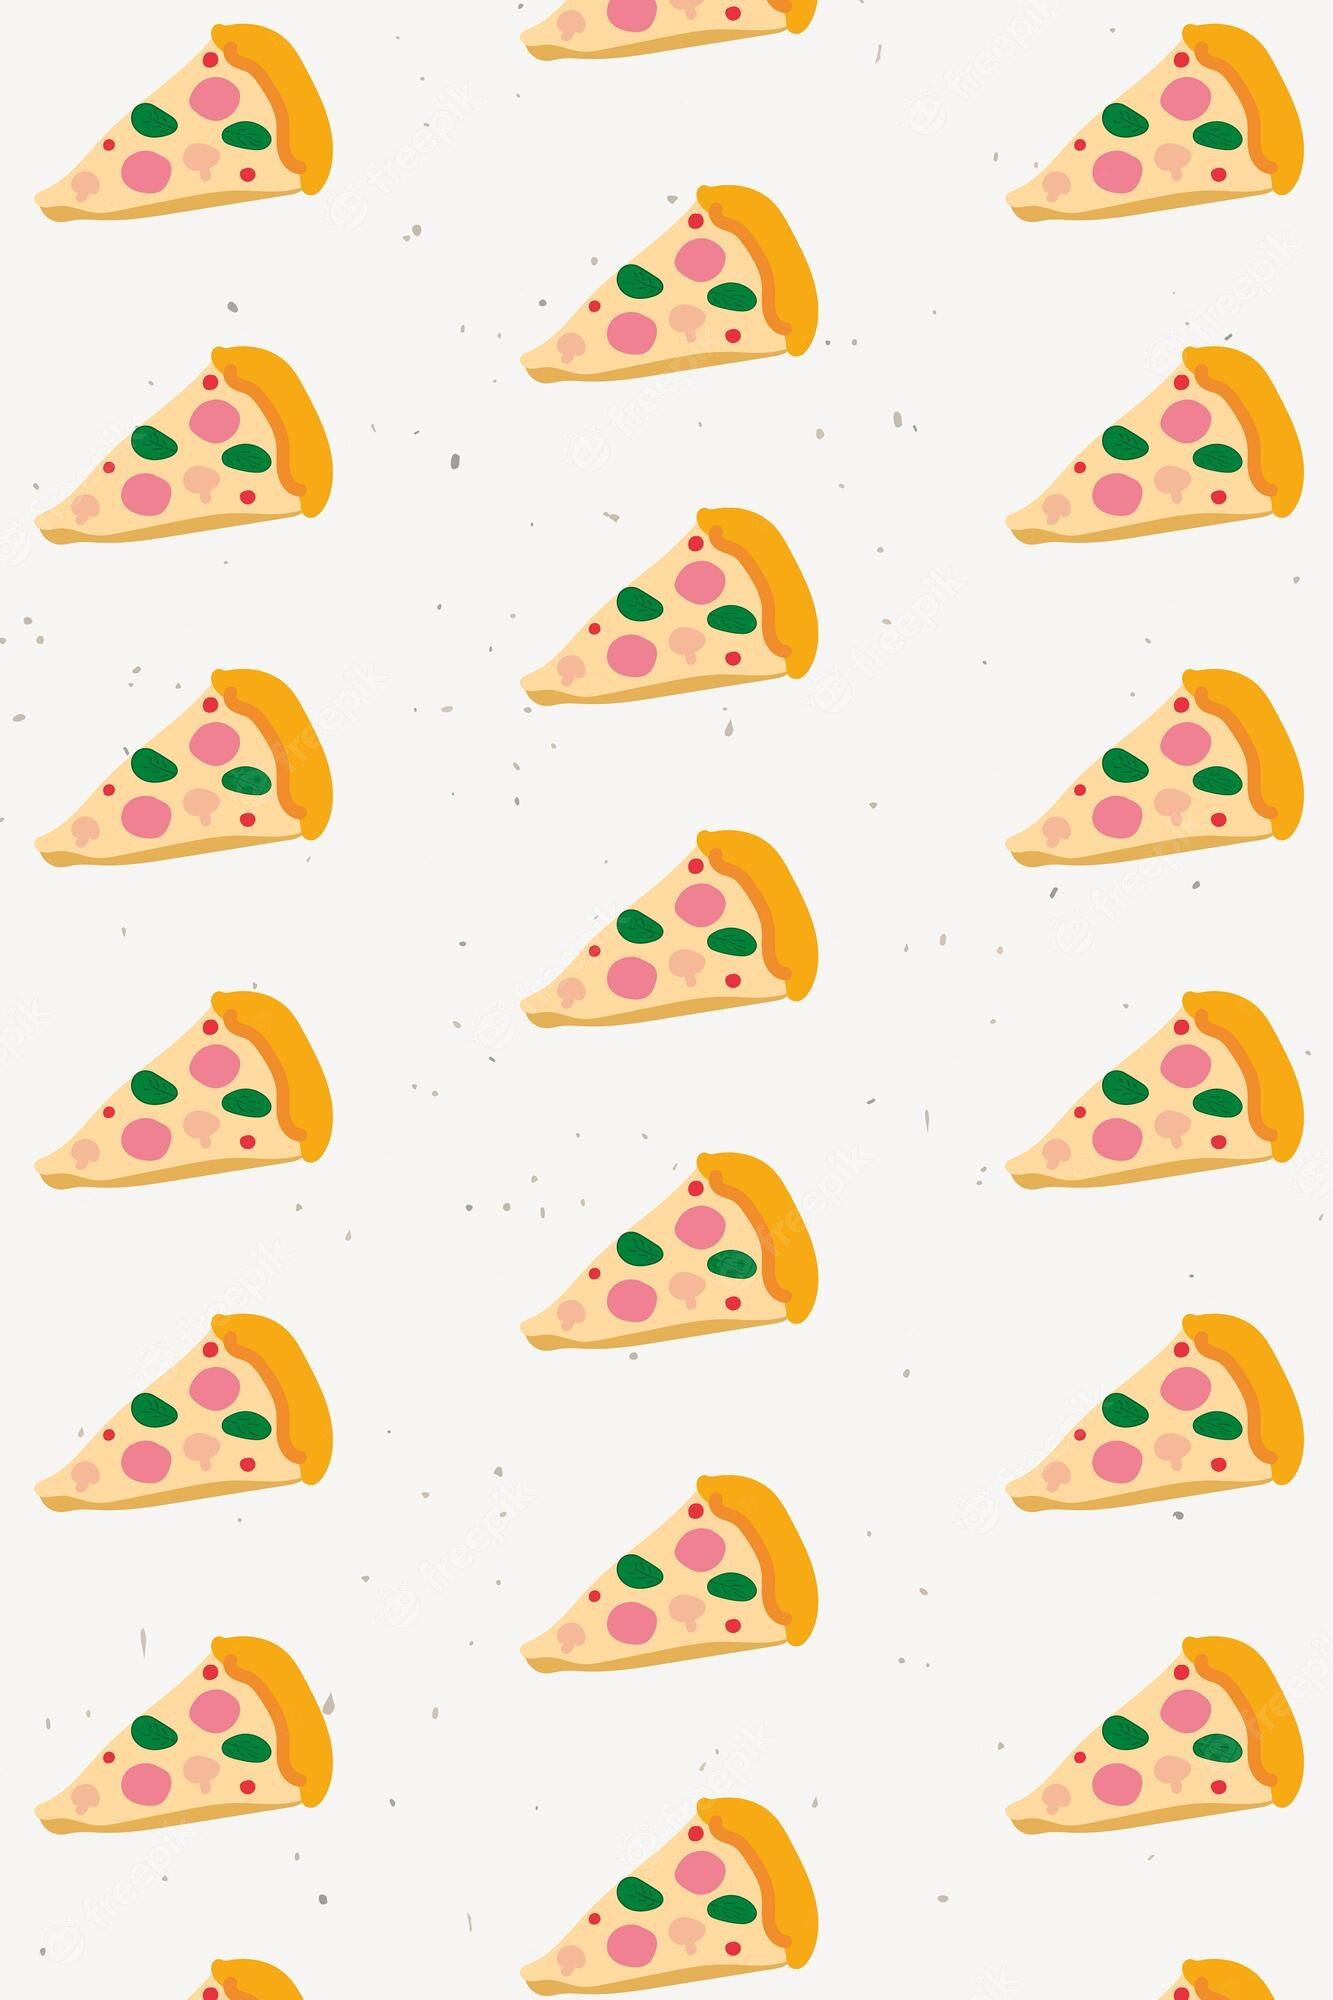 IPhone wallpaper of a pattern of different types of pizza - Pizza